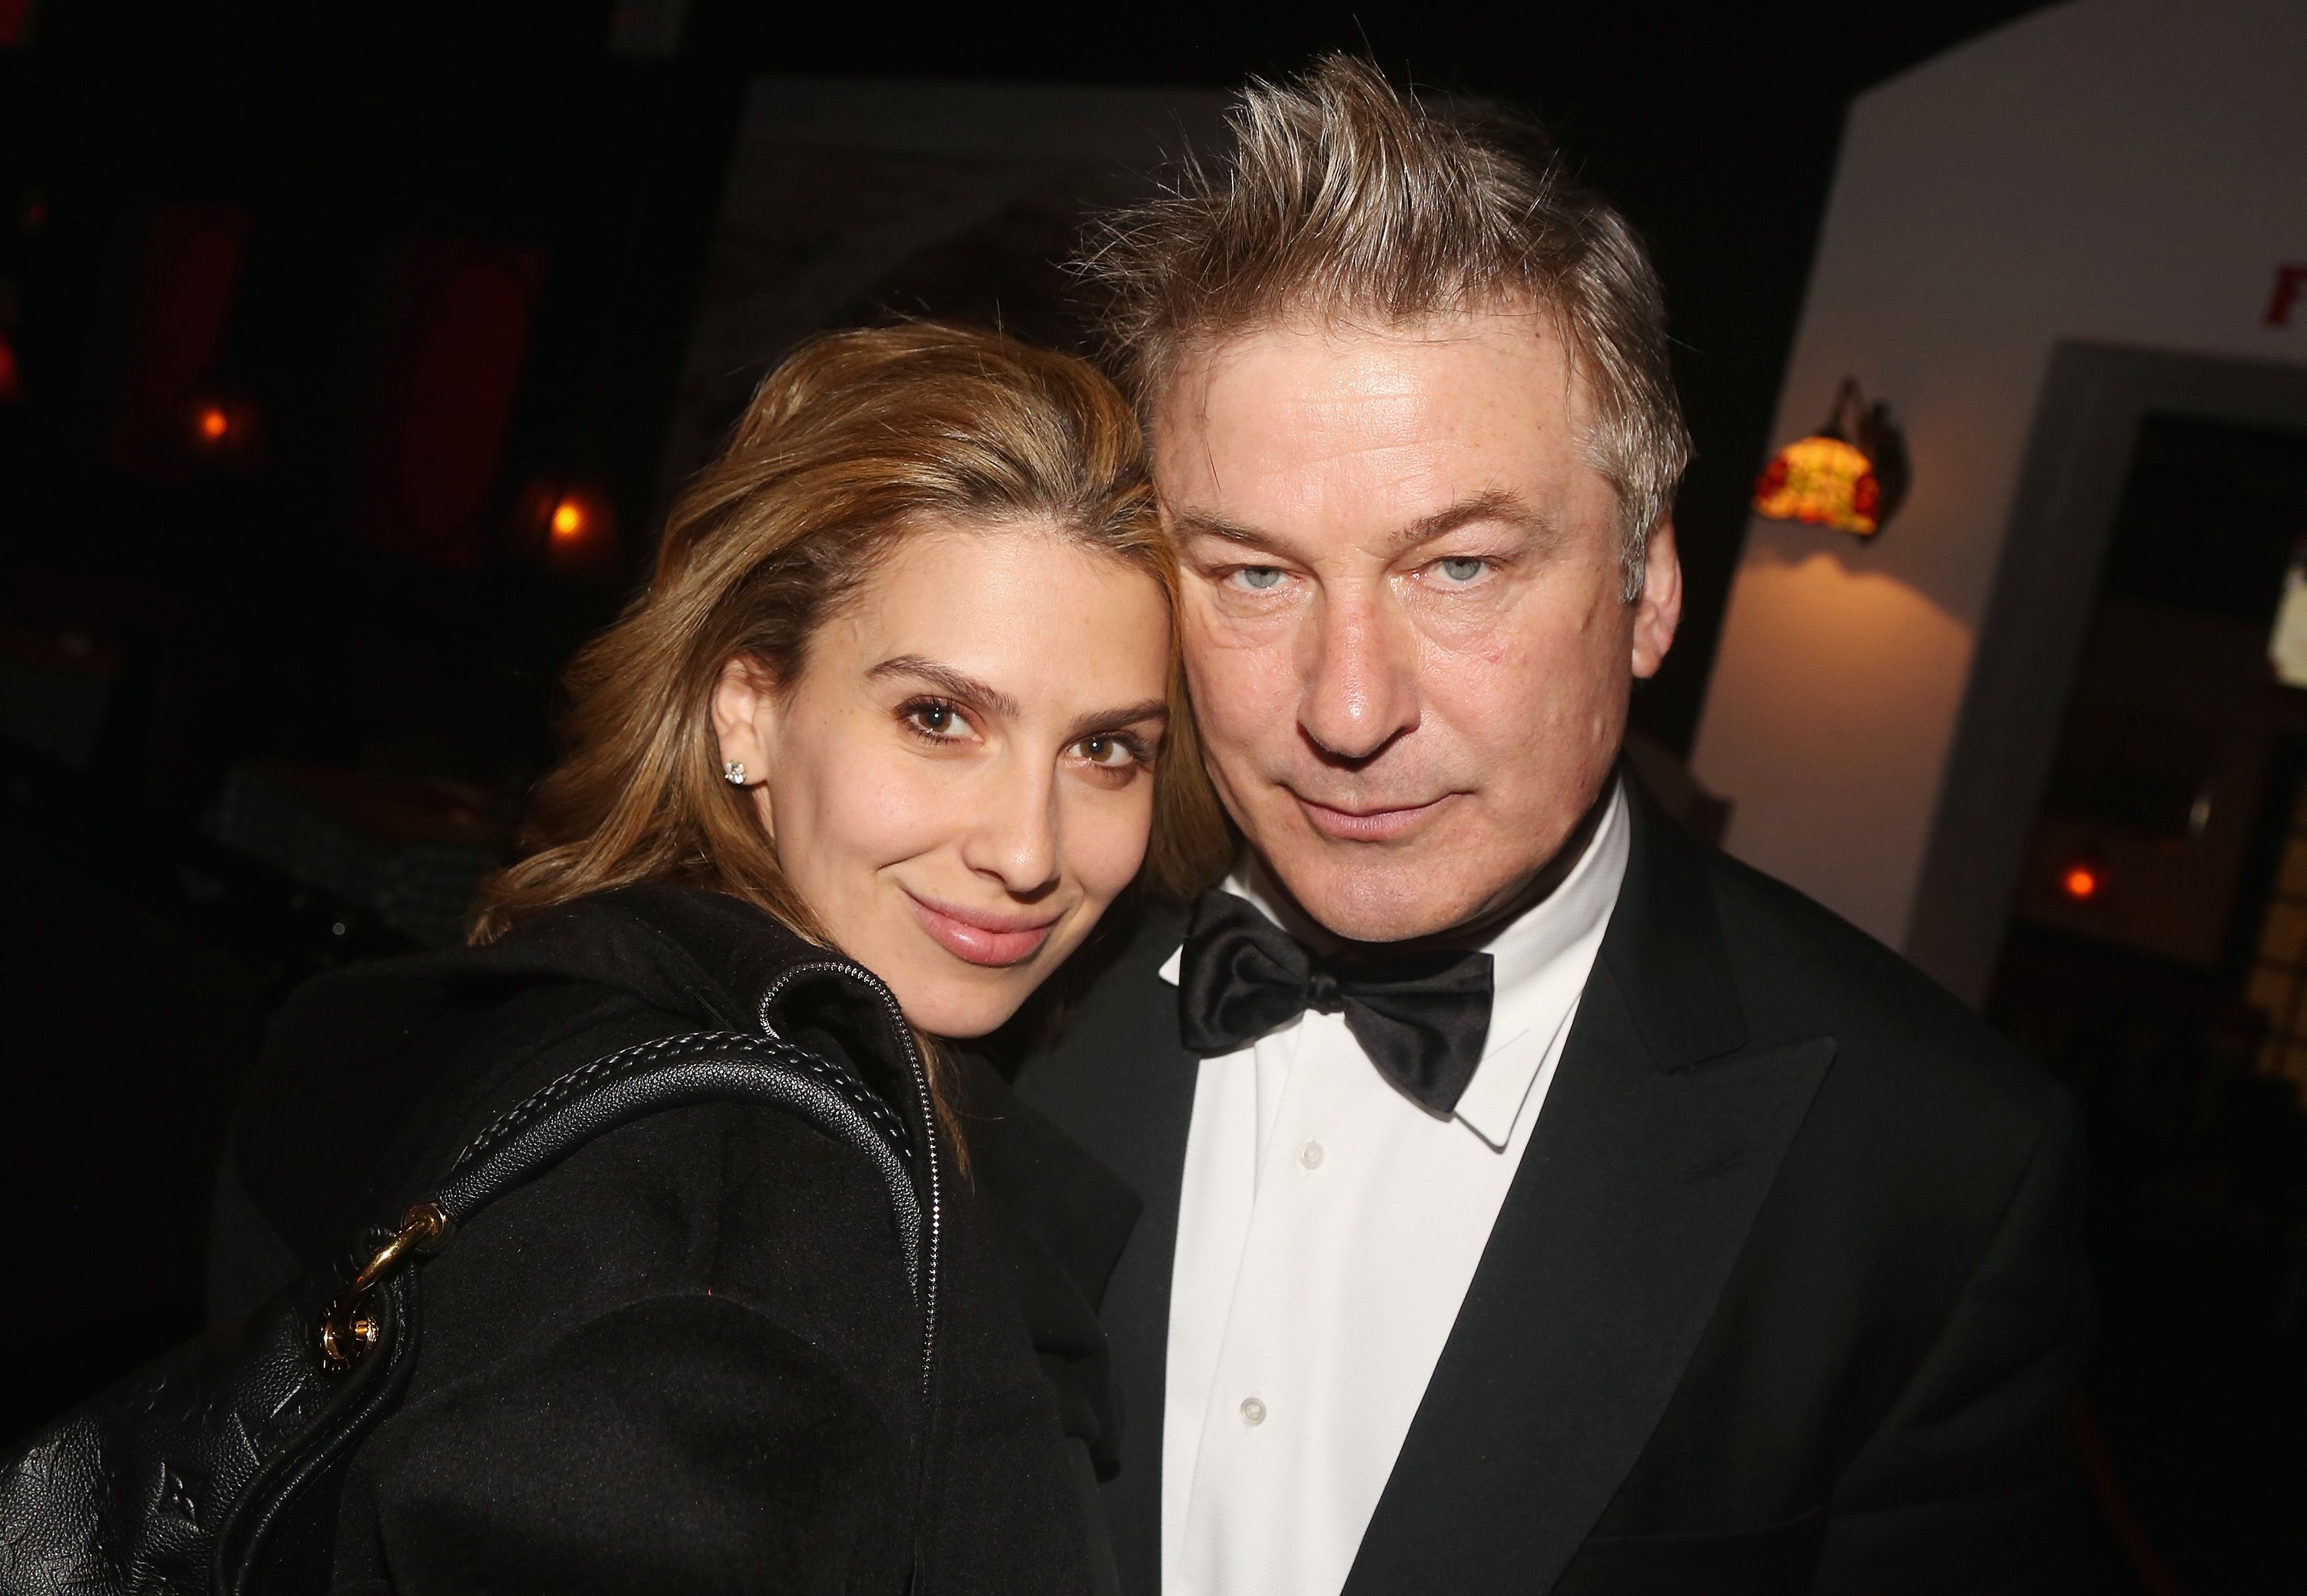 Hilaria Baldwin and Alec Baldwin at the after-party for The Roundabout Theatre Company in April 2019. | Photo: Getty Images